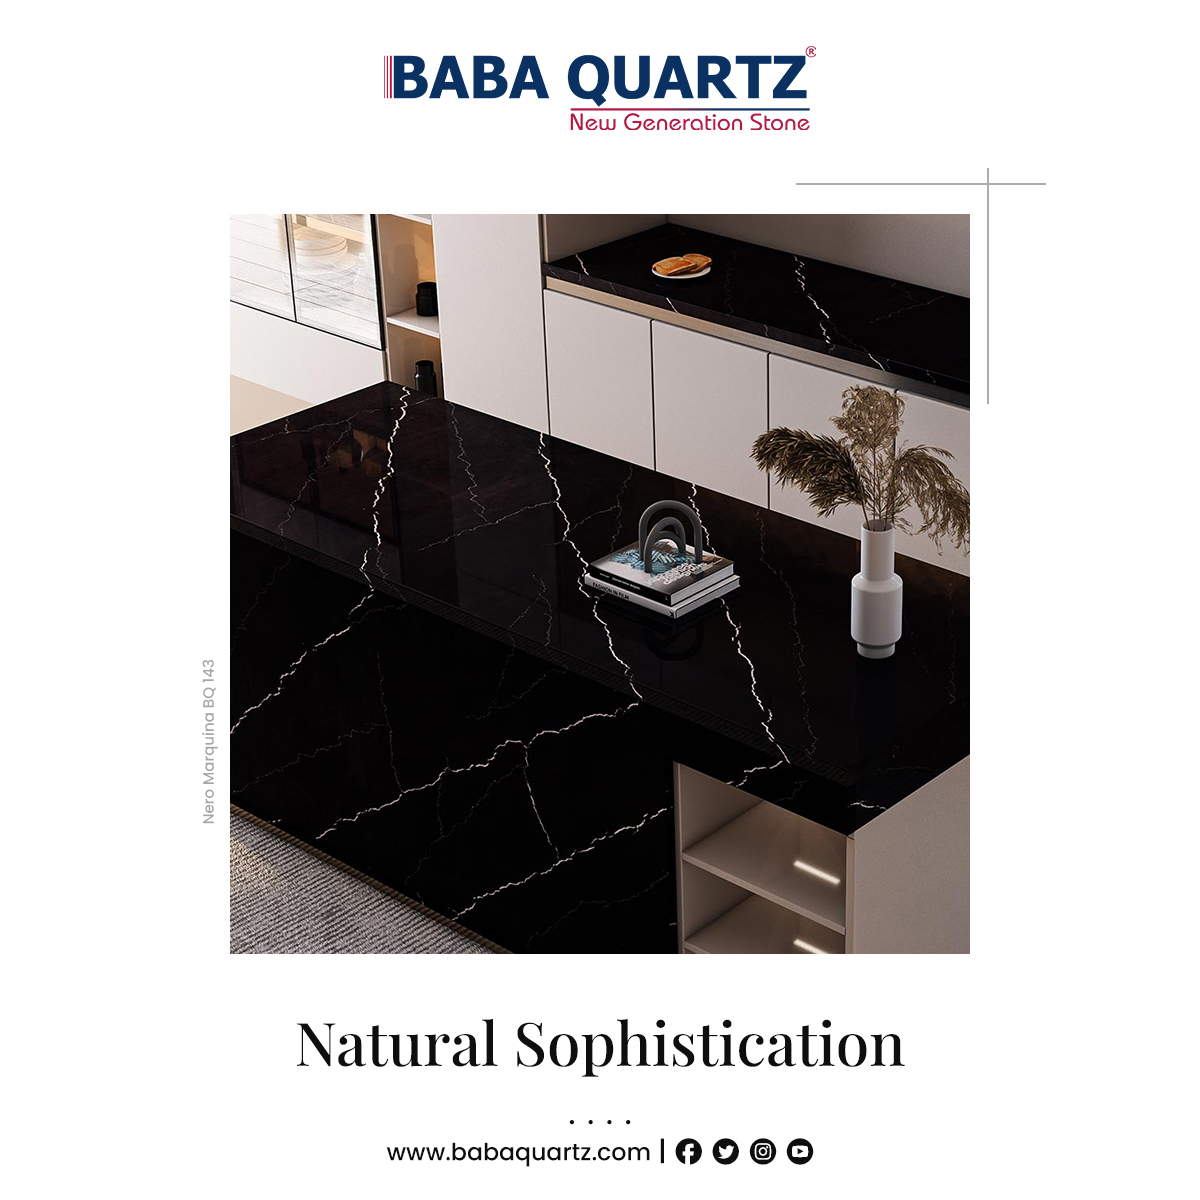 Give your kitchen counter tops the texture and see the look of a lavish interior coming alive only with BABA-Quartz.
ℕ𝕖𝕣𝕠 𝕄𝕒𝕣𝕢𝕦𝕚𝕟𝕒 𝔹ℚ 𝟙𝟜𝟛

#Babaquartz
#newgenerationstone
#Qstyle
#2023design
#modernstone
#stainresistant
#Quartz
#Made_in_India
#Atmanirbhar_bharat